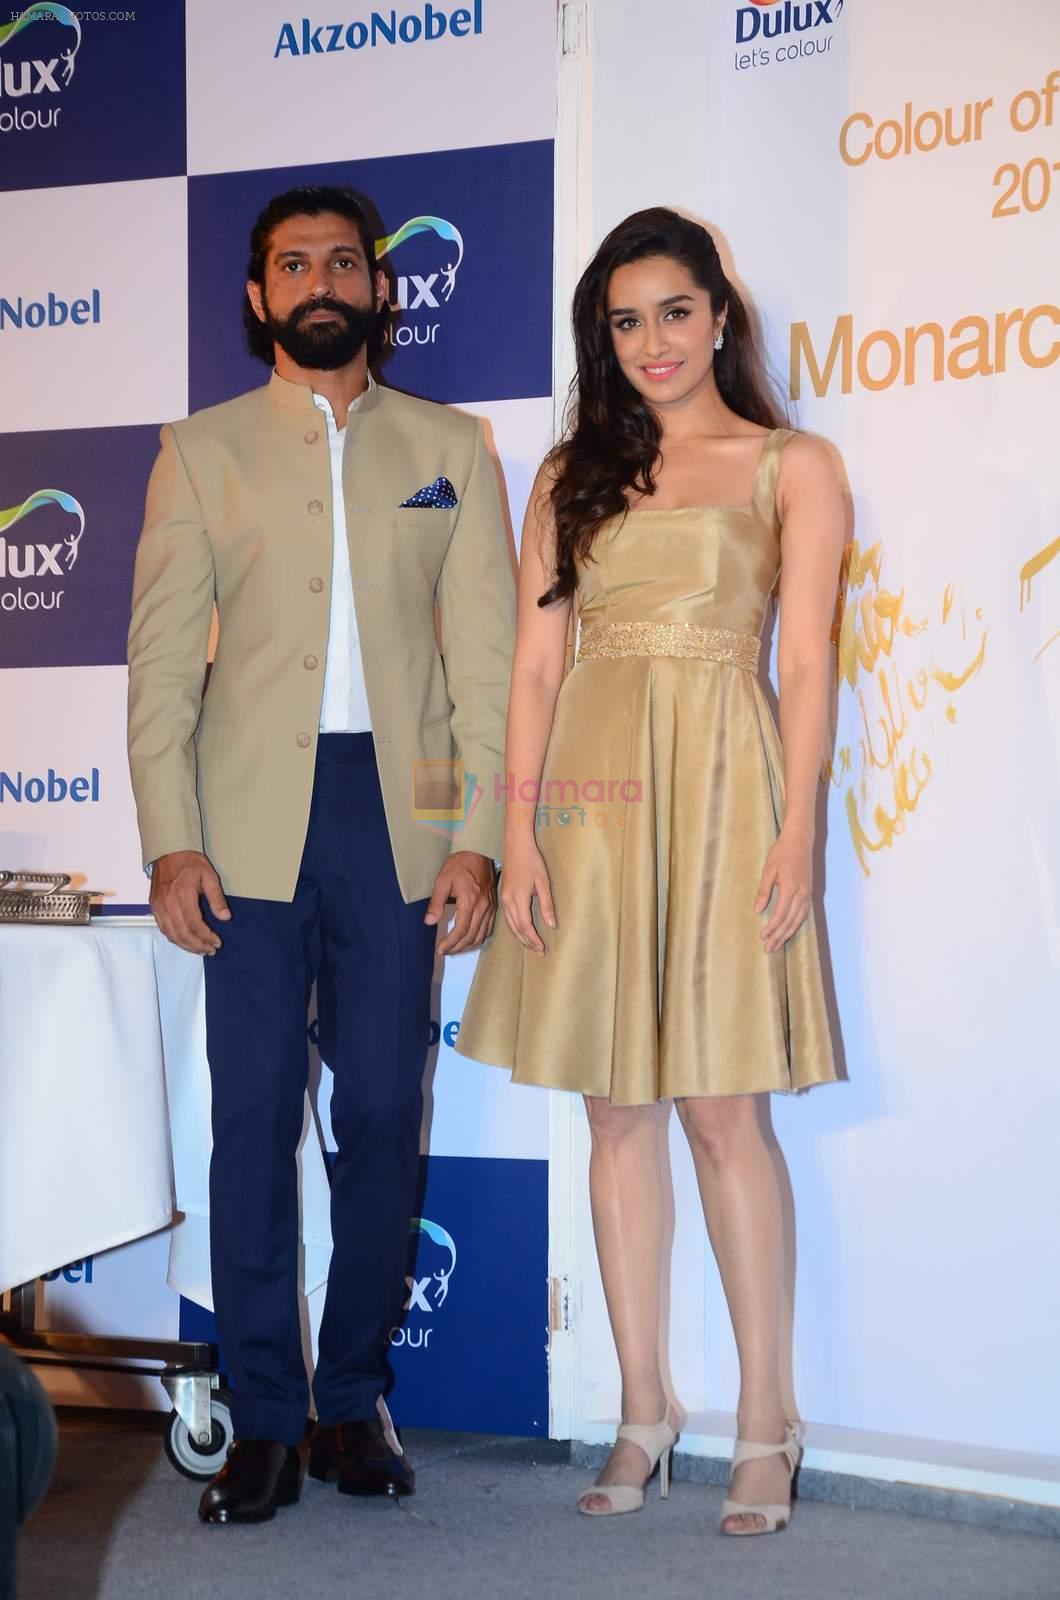 Farhan Akhtar and Shraddha Kapoor at Dulux event on 2nd Dec 2015